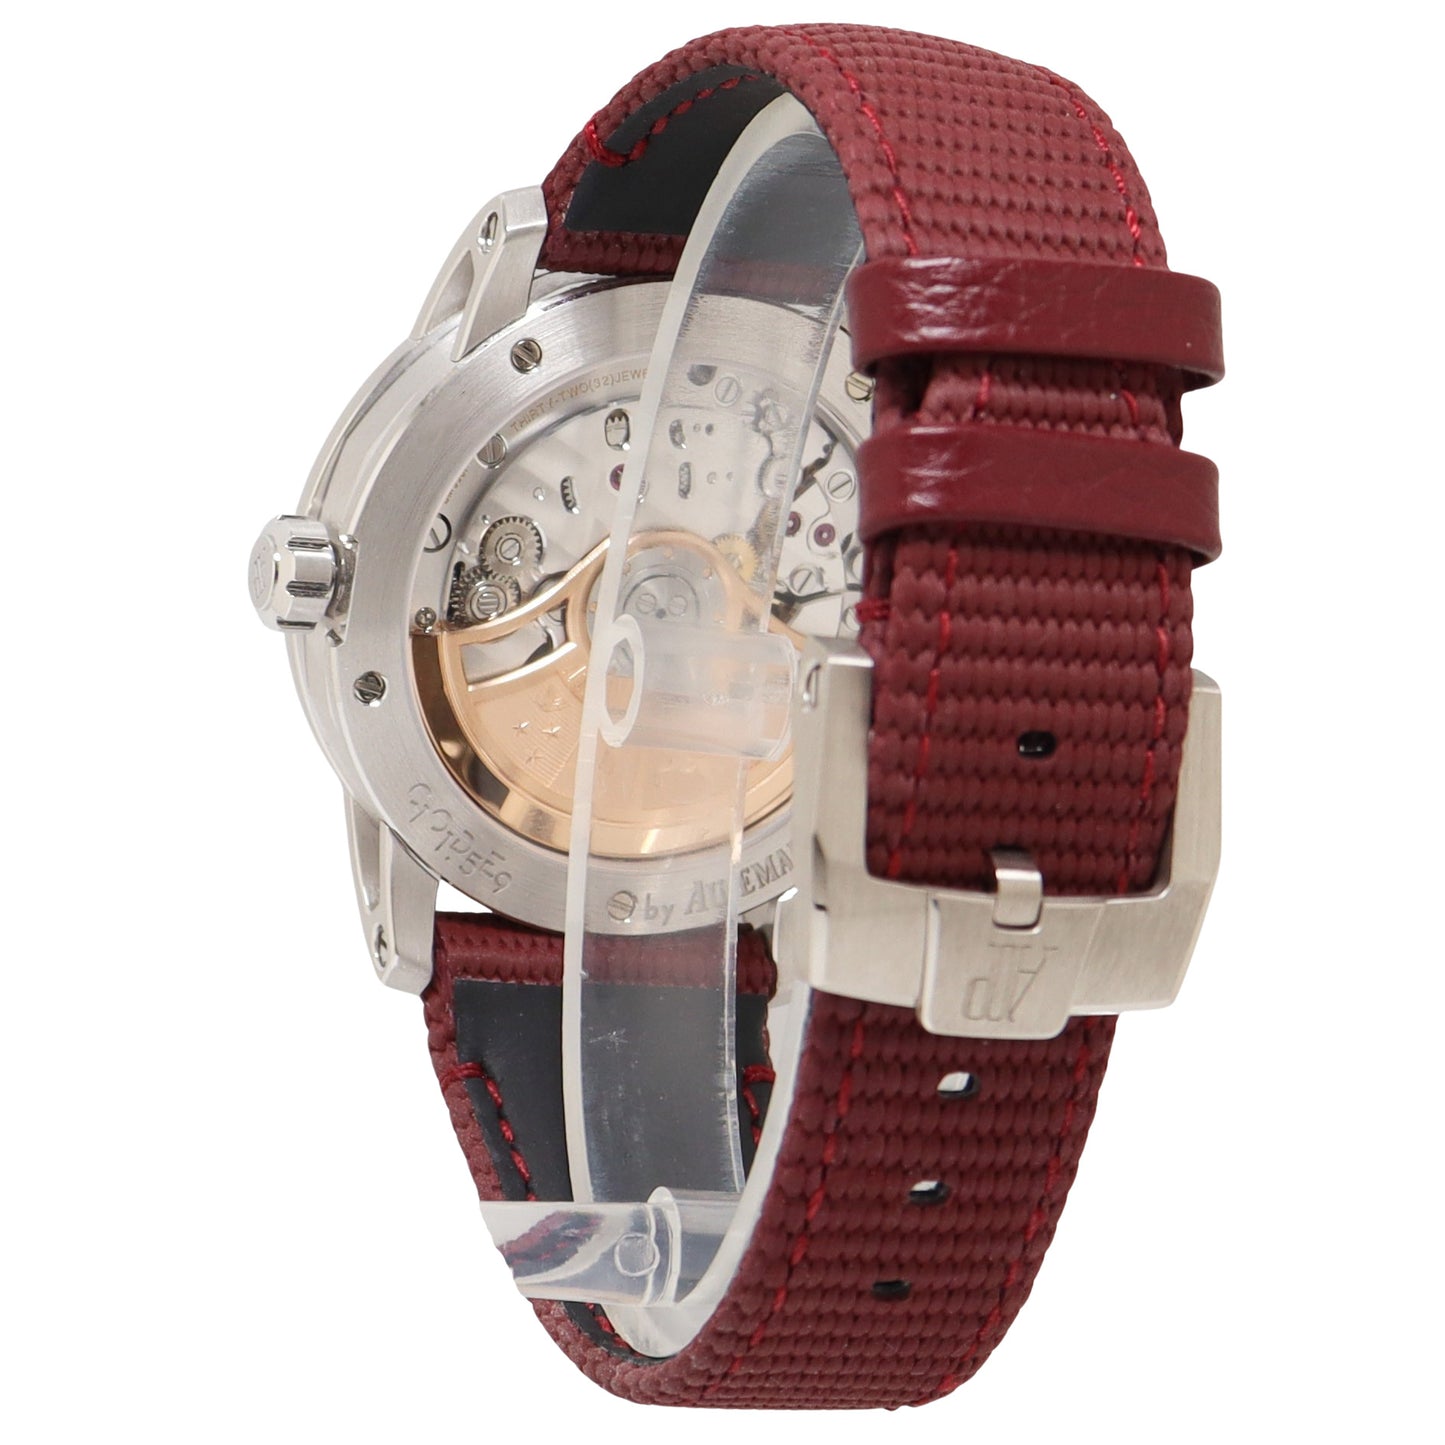 Audemars Piget Code 11.59 41mm White Gold Smoke Burgundy Dial Watch Reference# 15210BC.OO.A500KB.01 - Happy Jewelers Fine Jewelry Lifetime Warranty